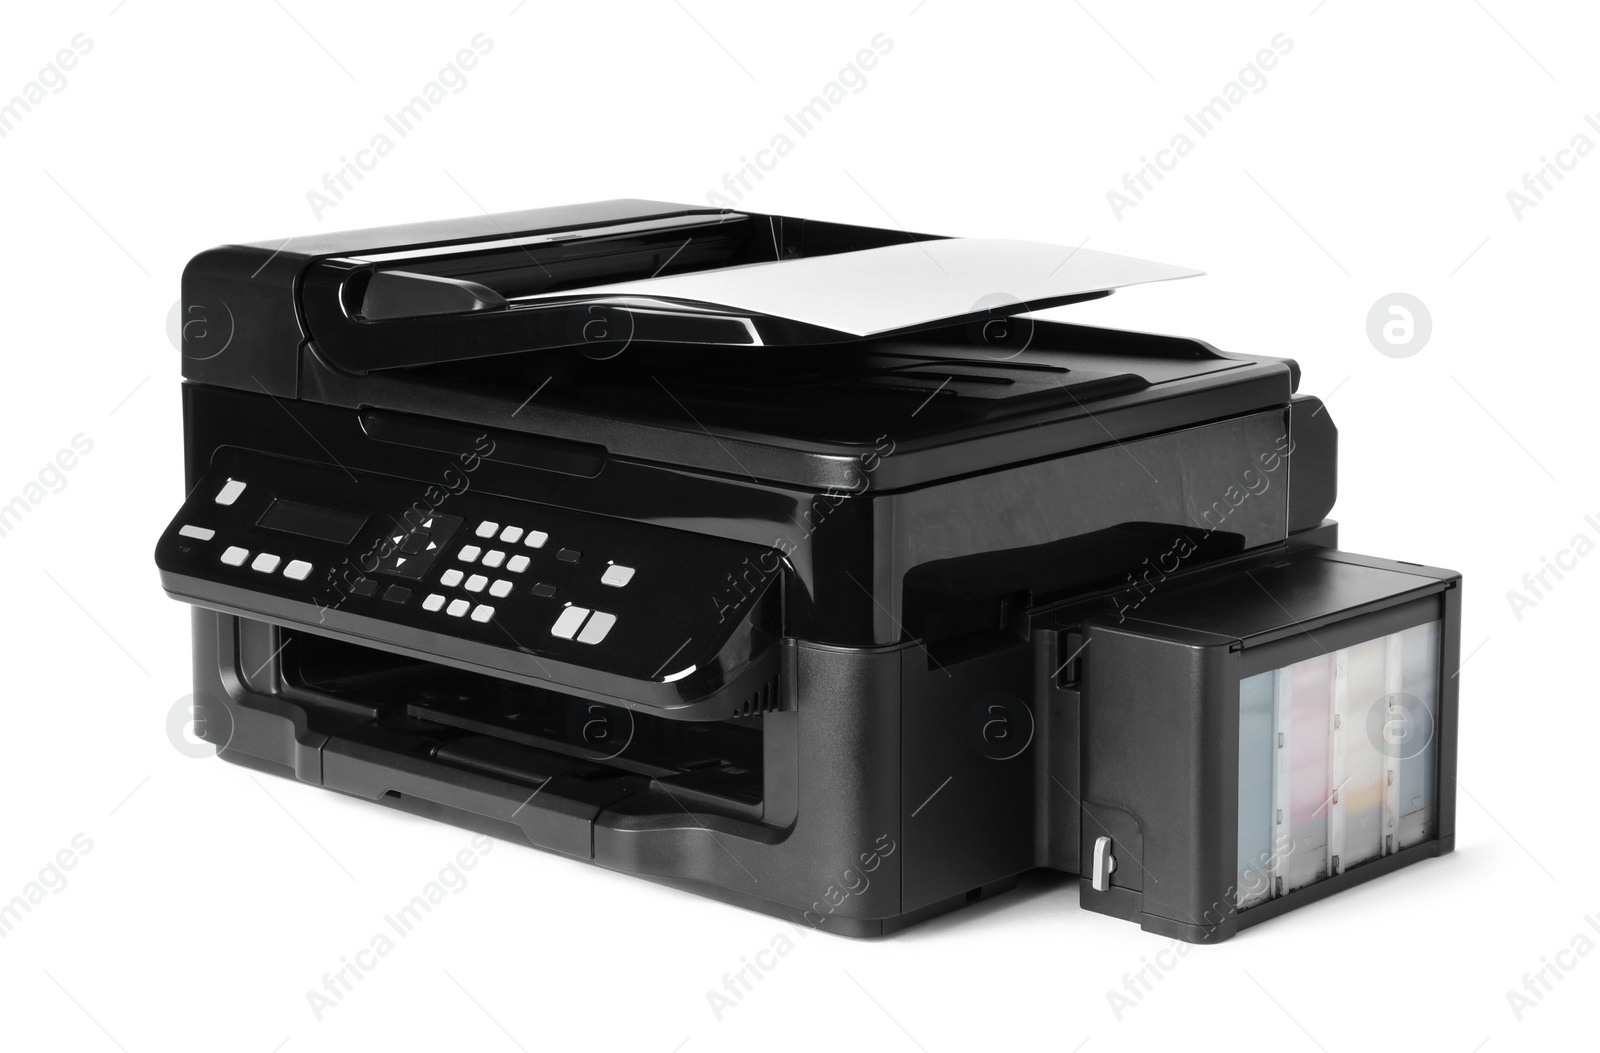 Photo of New modern multifunction printer isolated on white